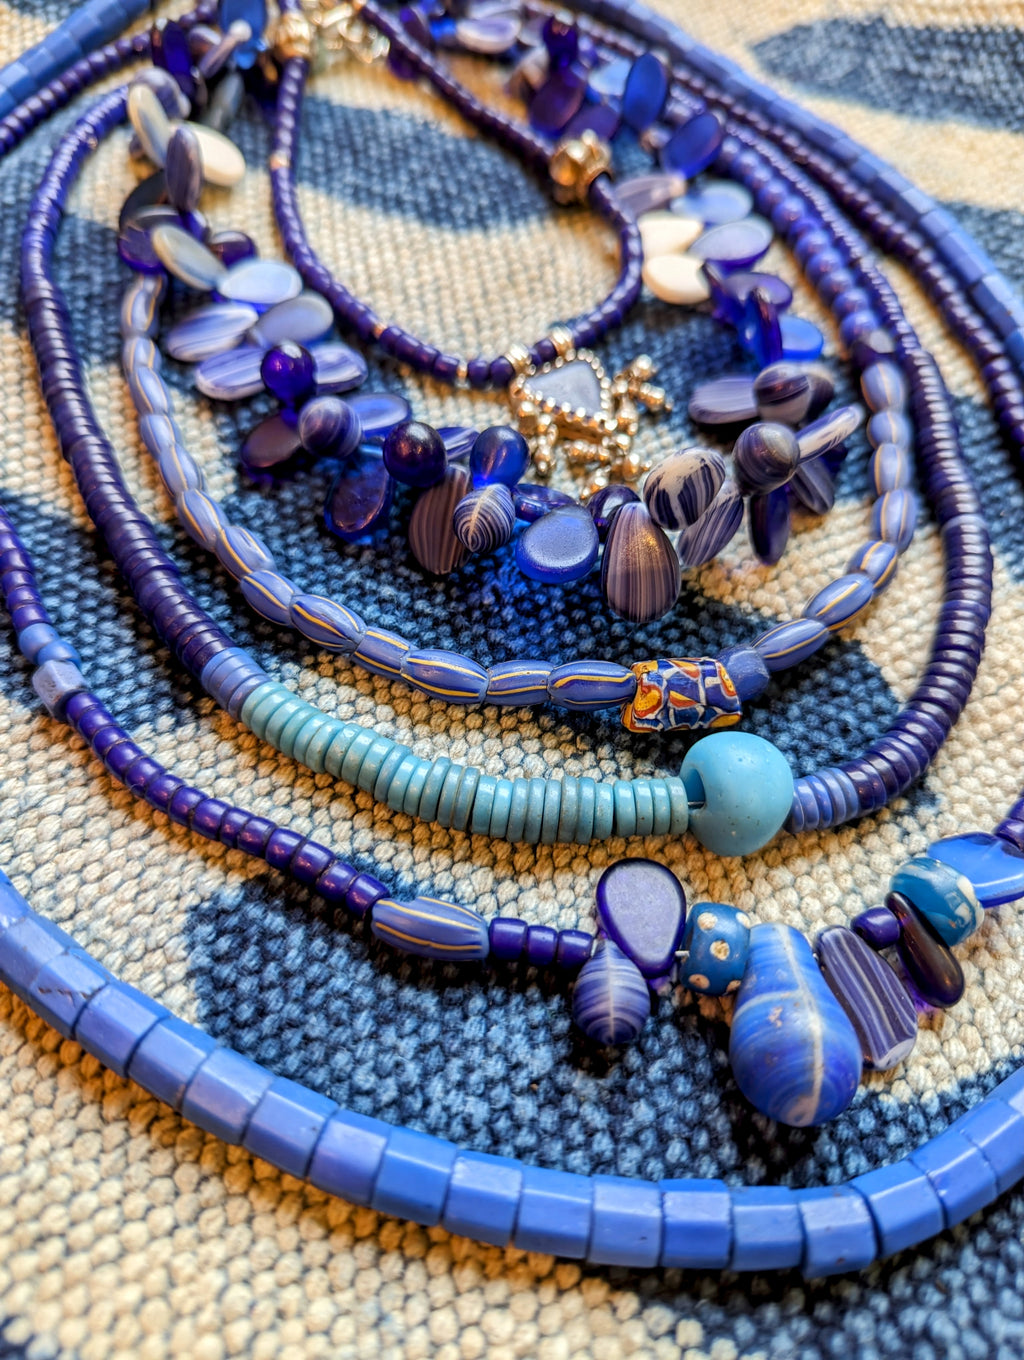 Heavenly antique Bohemian and Venetian glass trade bead necklaces all different shapes and sizes, but all in beautiful blue hues for all you indigo fanatics out there!!

All these glass beads were made between 1820-1932

Masai blue beads with silver Bohemian glass amulet 17" long

Fulani wedding beads, Bohemian glass, 17"long

Venetian blue/yellow stripe and millefiore bead 21" long

French padre, and blue dogon beads from Togo 24" long

Long Masai and Fulani beads 28" long

Ethiopian Bohemian glass 31" lon